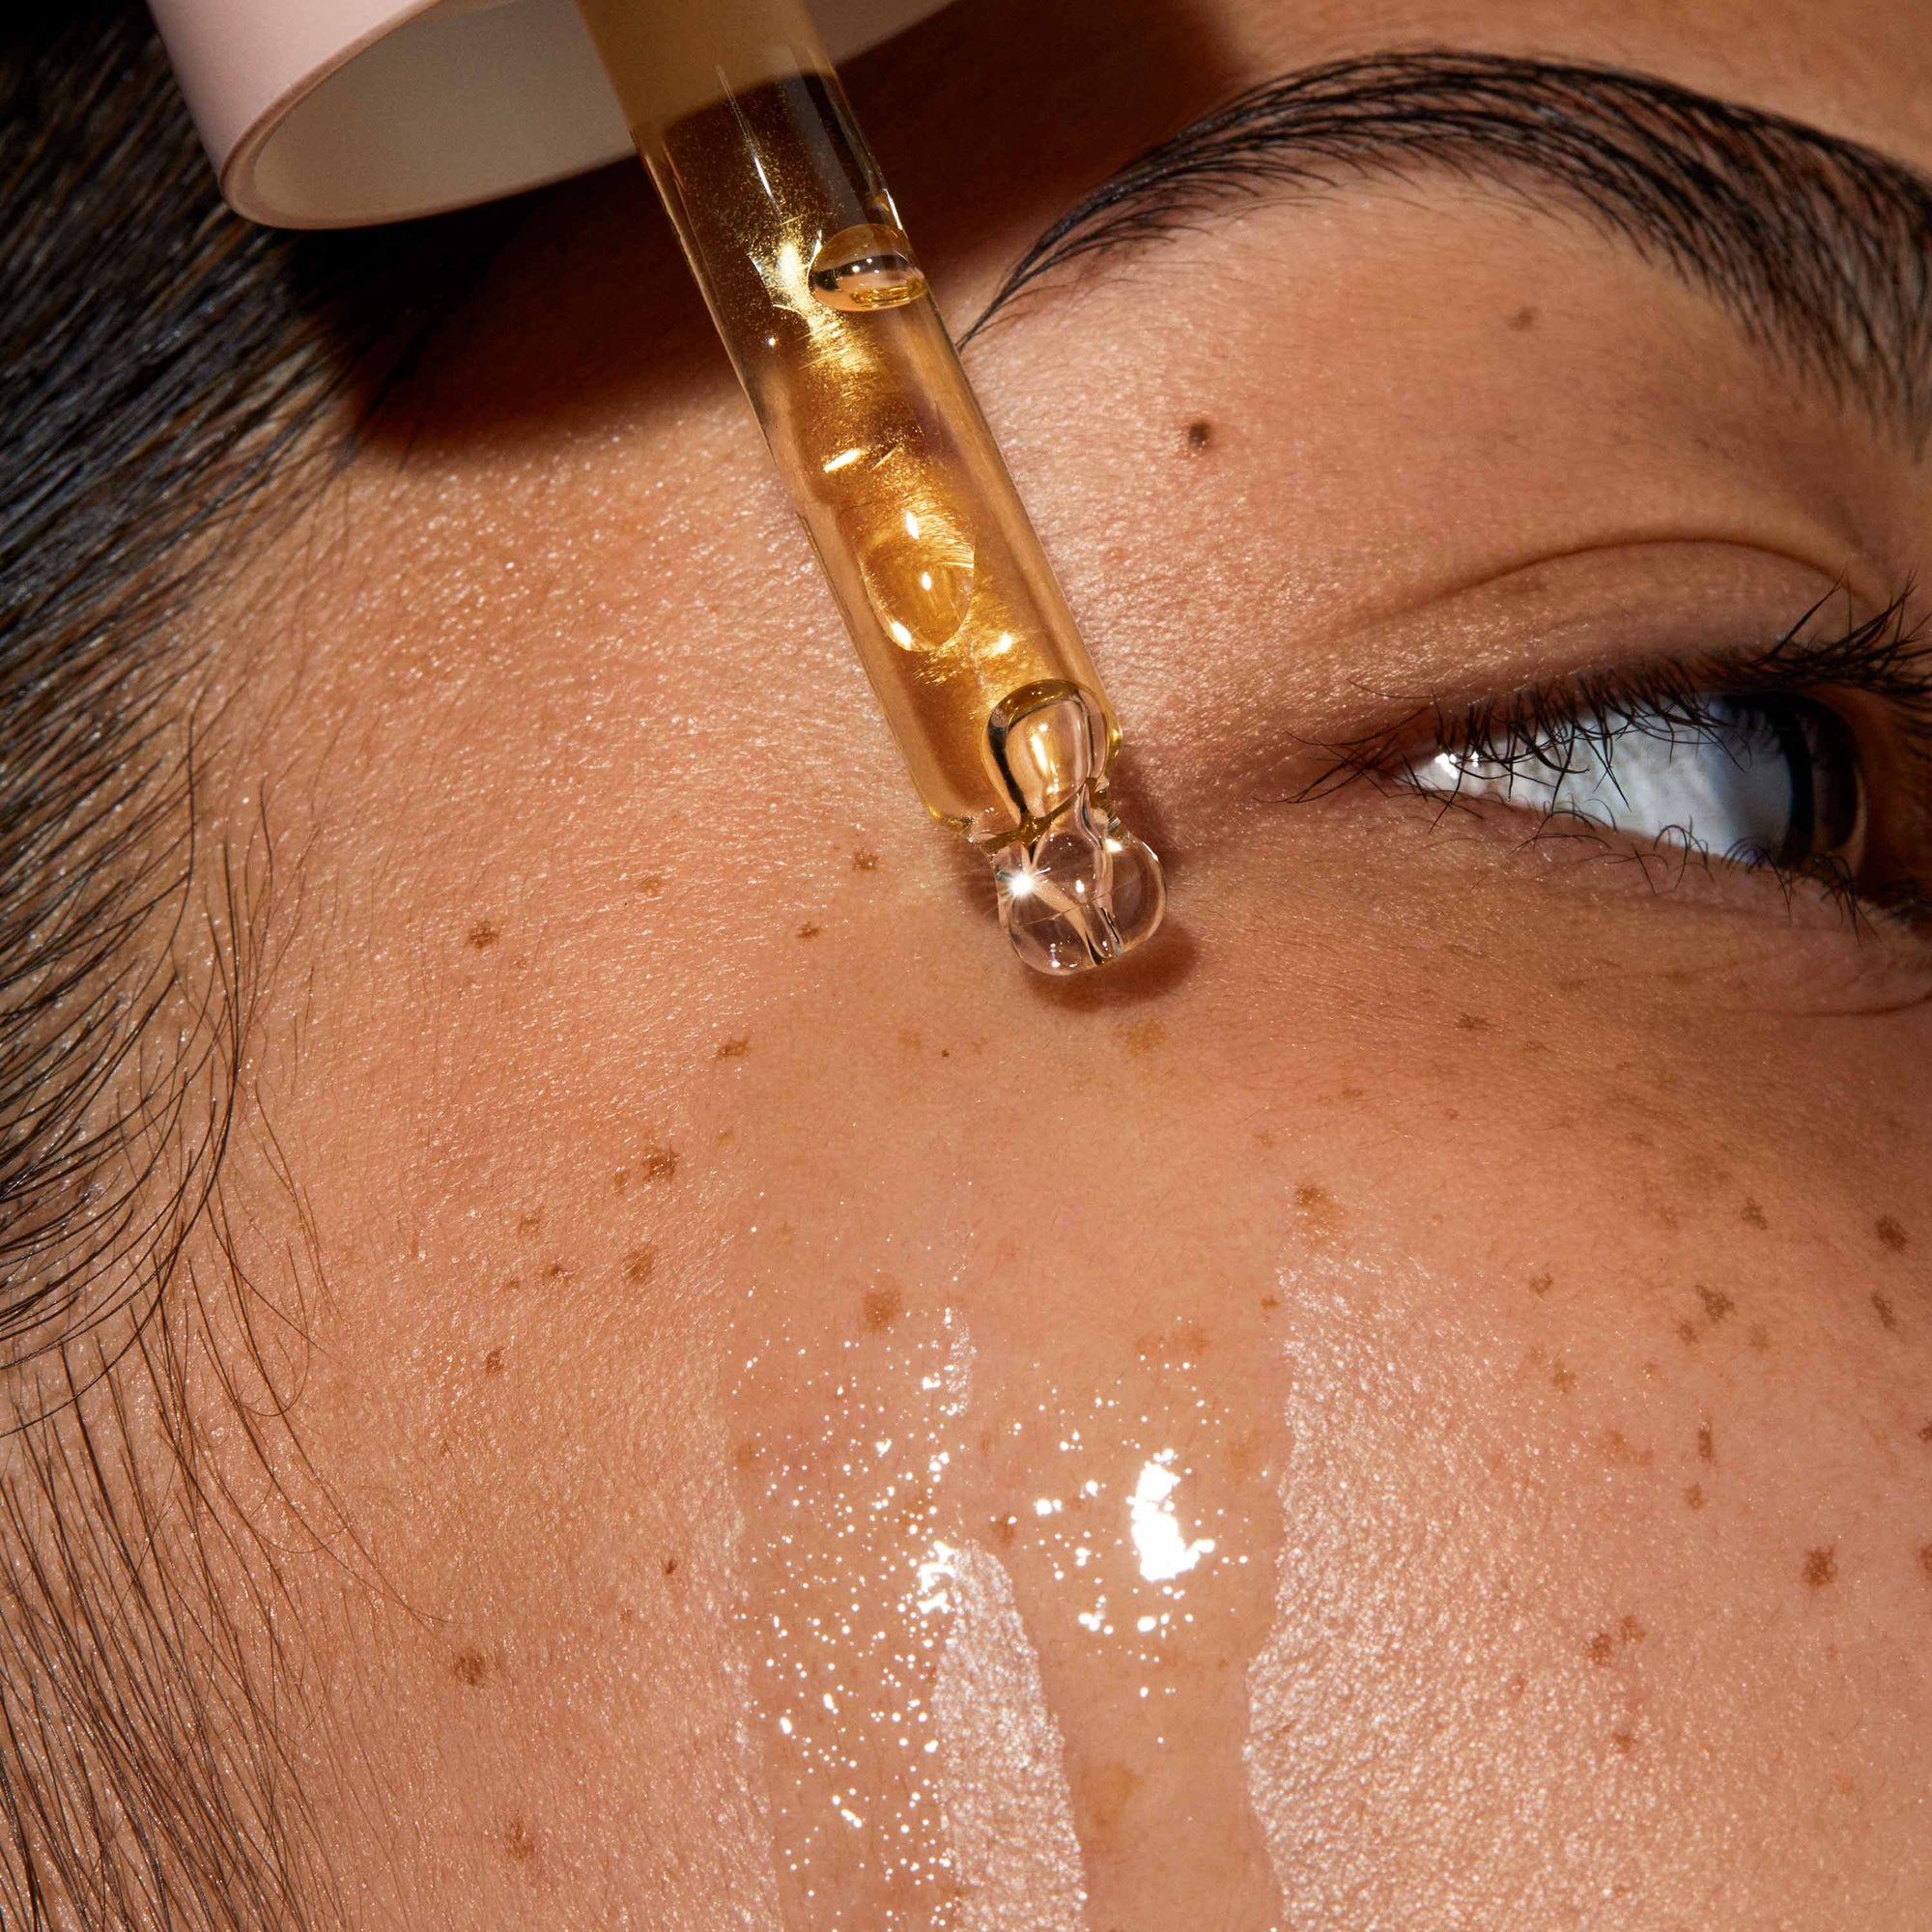 A super close up of model's face Queen oil is applied to her skin with a pipette. The skin is glowy and hydrated.